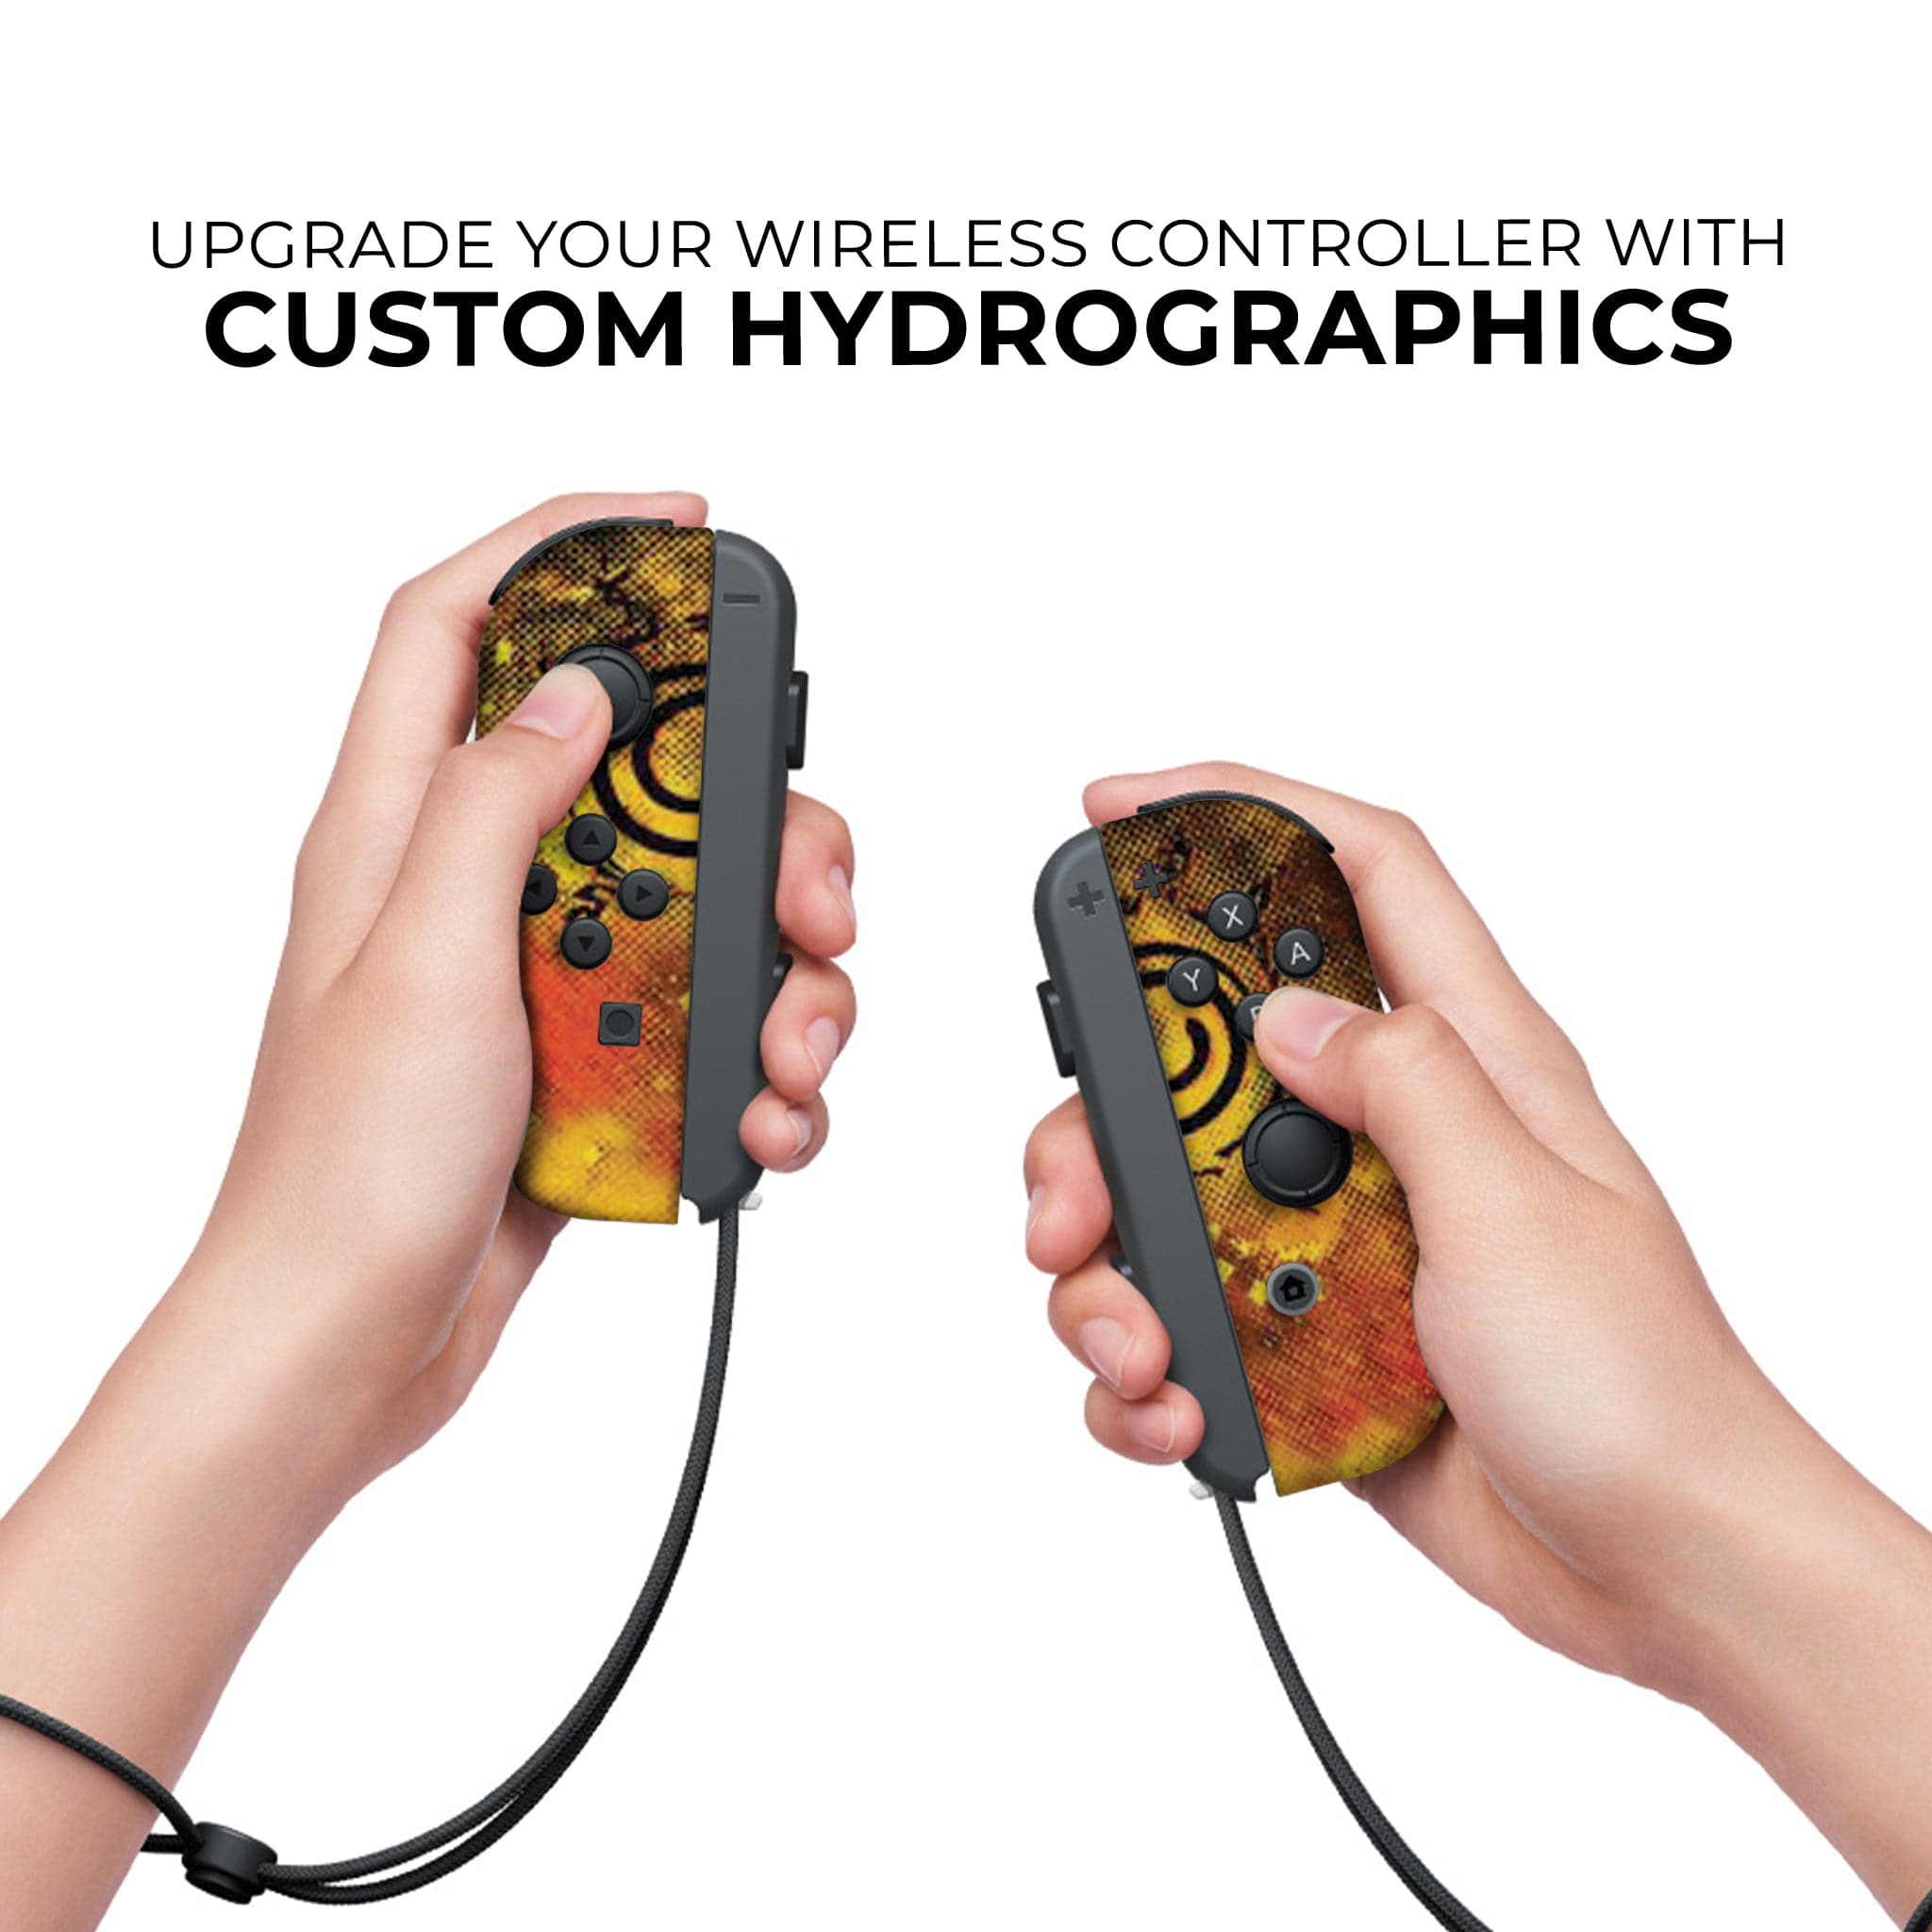 Naruto Inspired Nintendo Switch Joy-Con Left and Right Switch Controllers by Nintendo